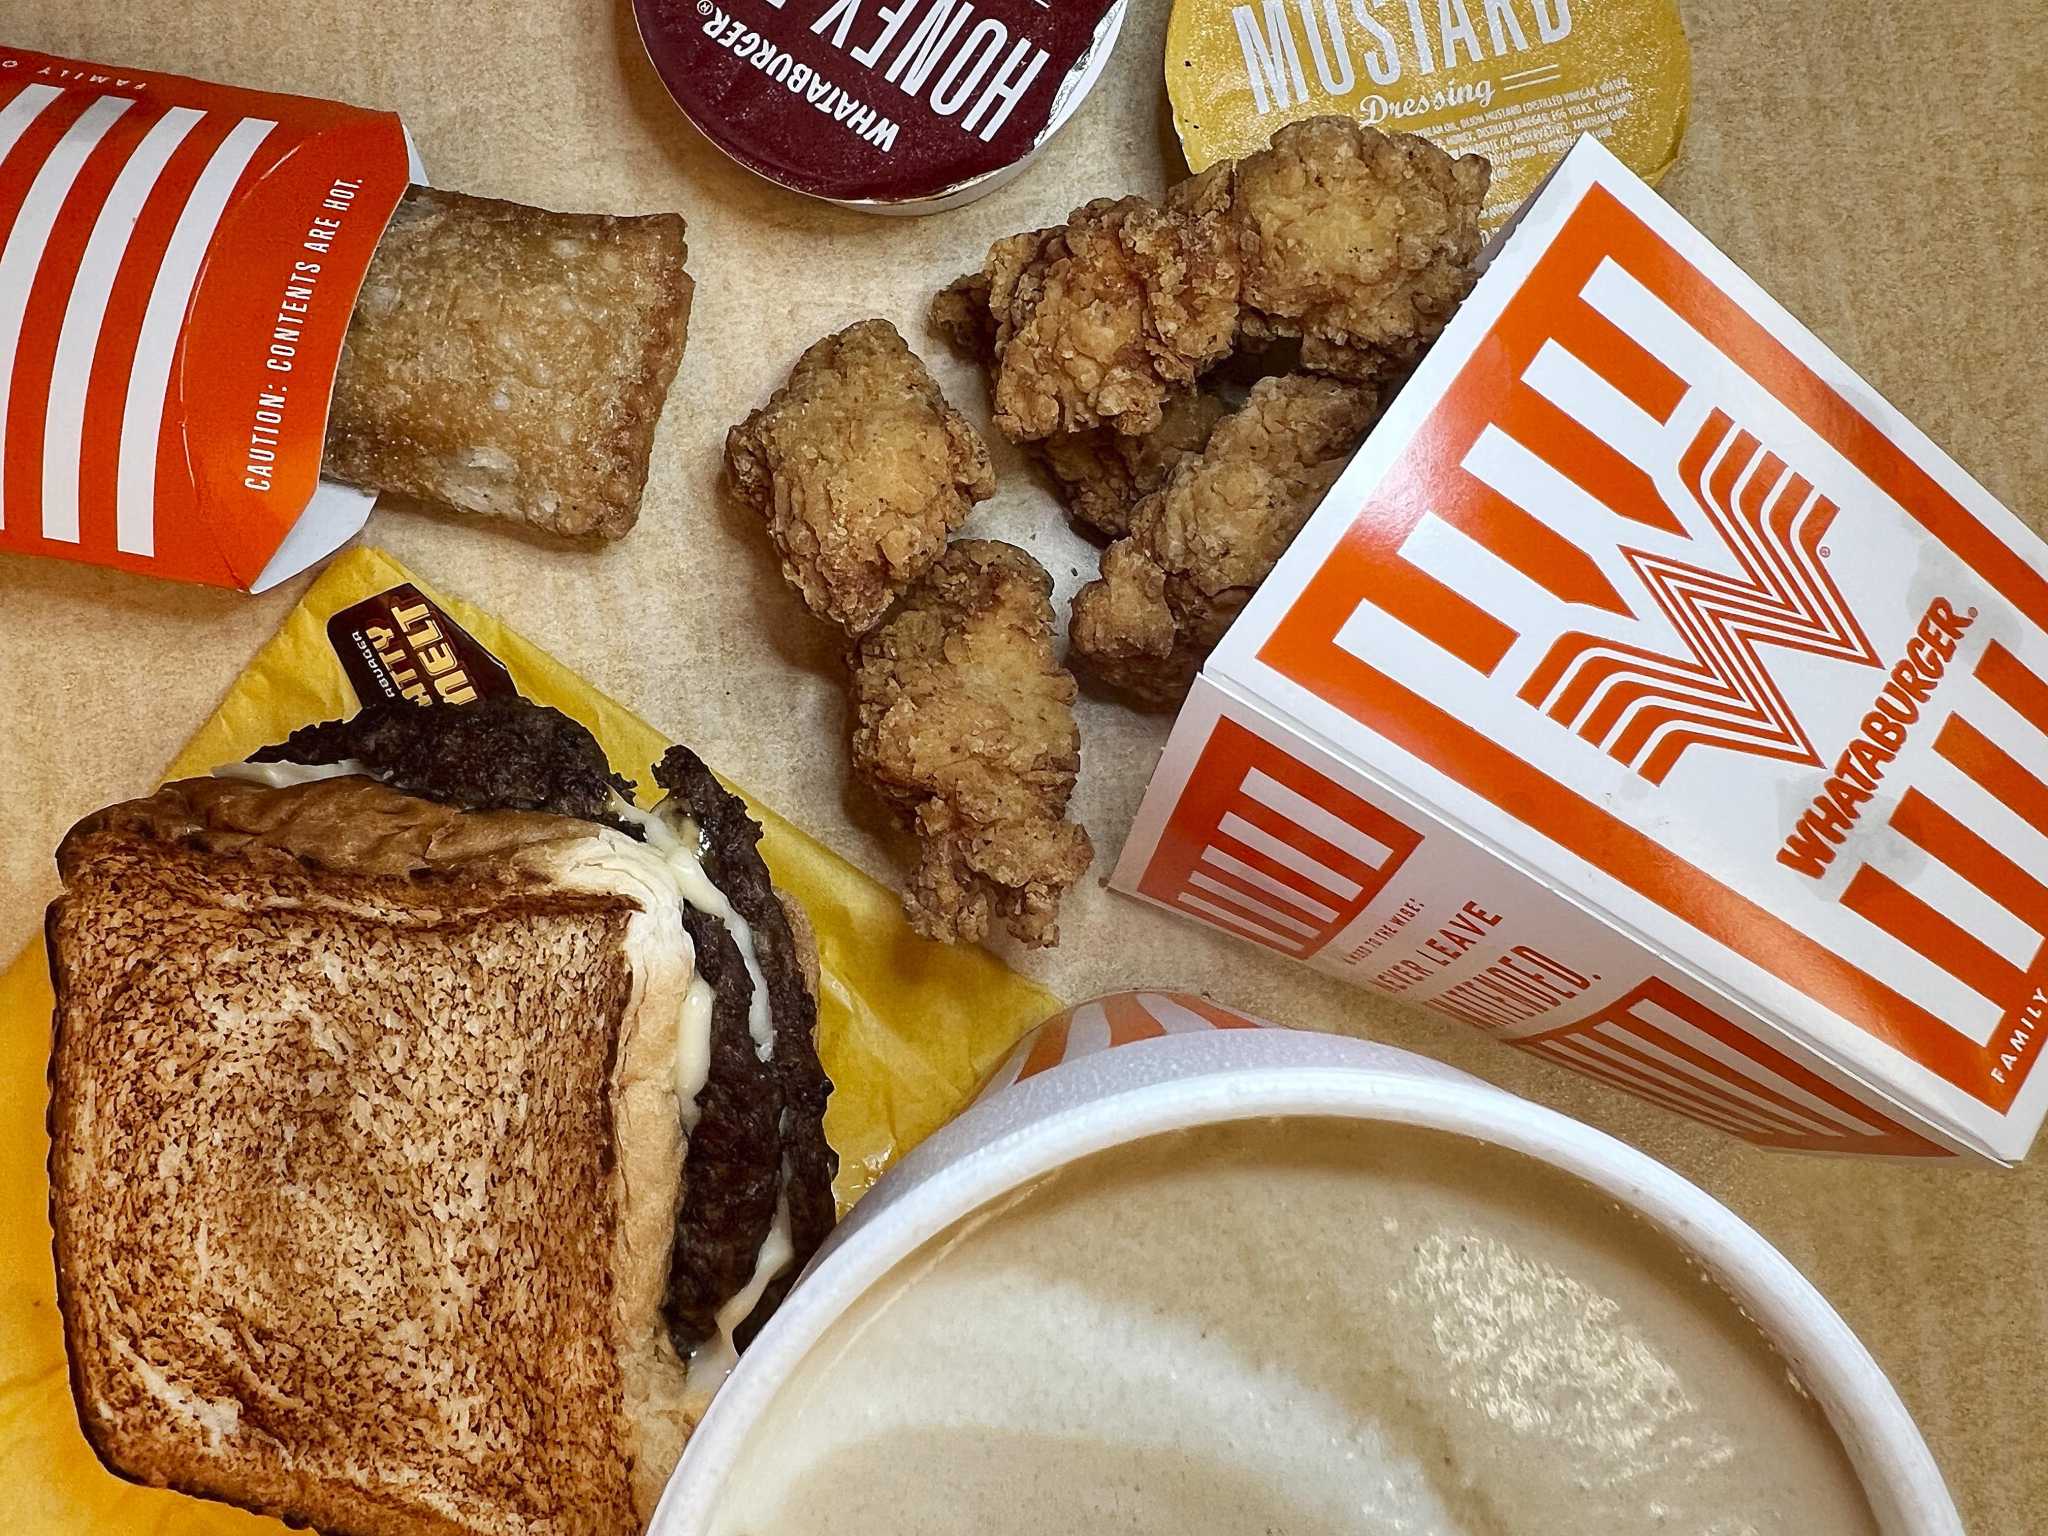 Georgia: Whataburger announces plans for 8 fast food locations